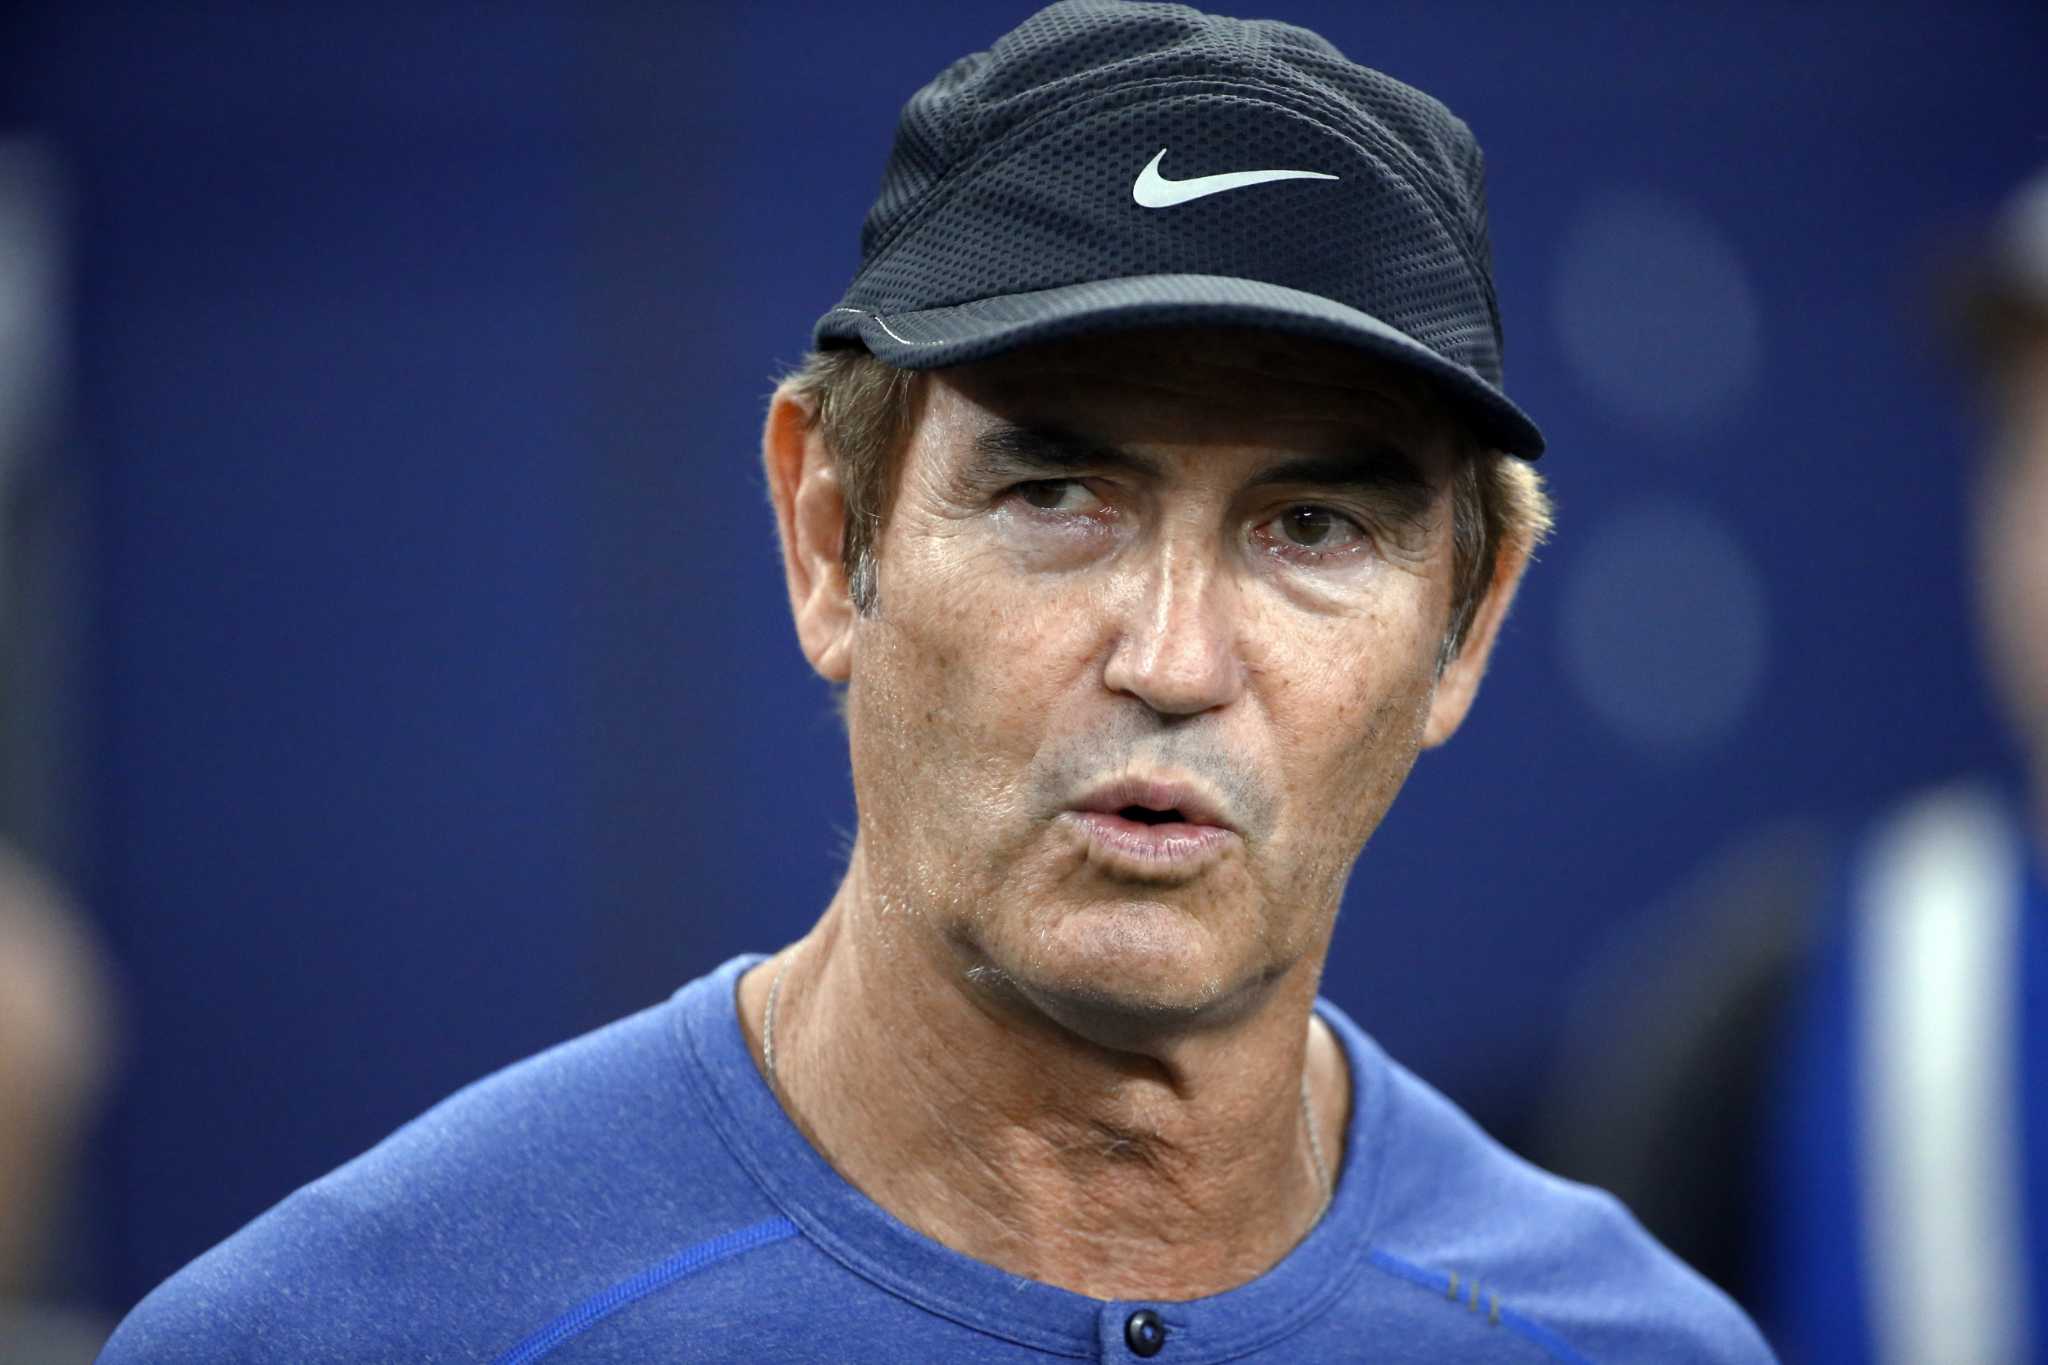 Former Baylor coach Art Briles hired at Mount Vernon High